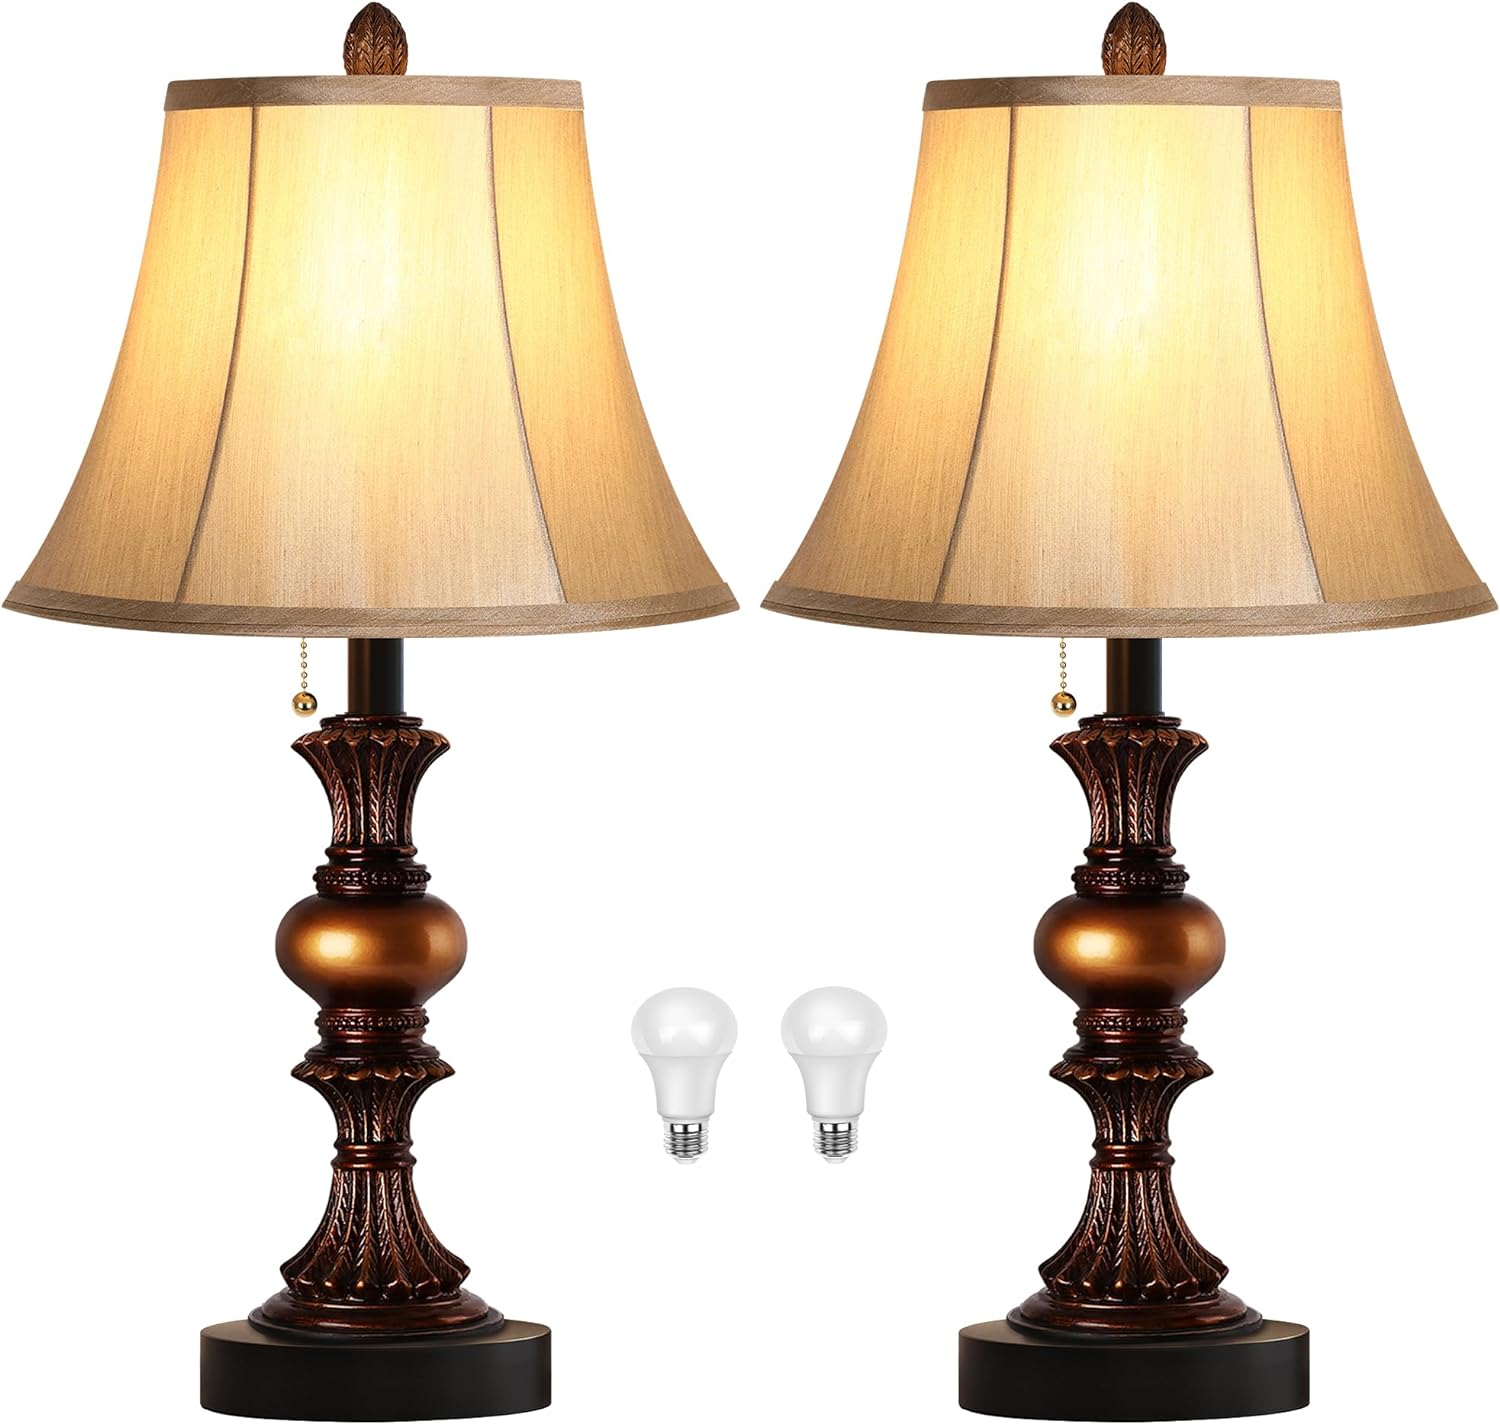 Traditional Table Lamp Set of 2, Classic Bedside Lamps Nightstand Lamps with 3-Color Temperature LED Bulbs, Vintage Bronze Desk Lamps with Faux Silk Shade for Living Room Bedroom, Pull Chain Switch